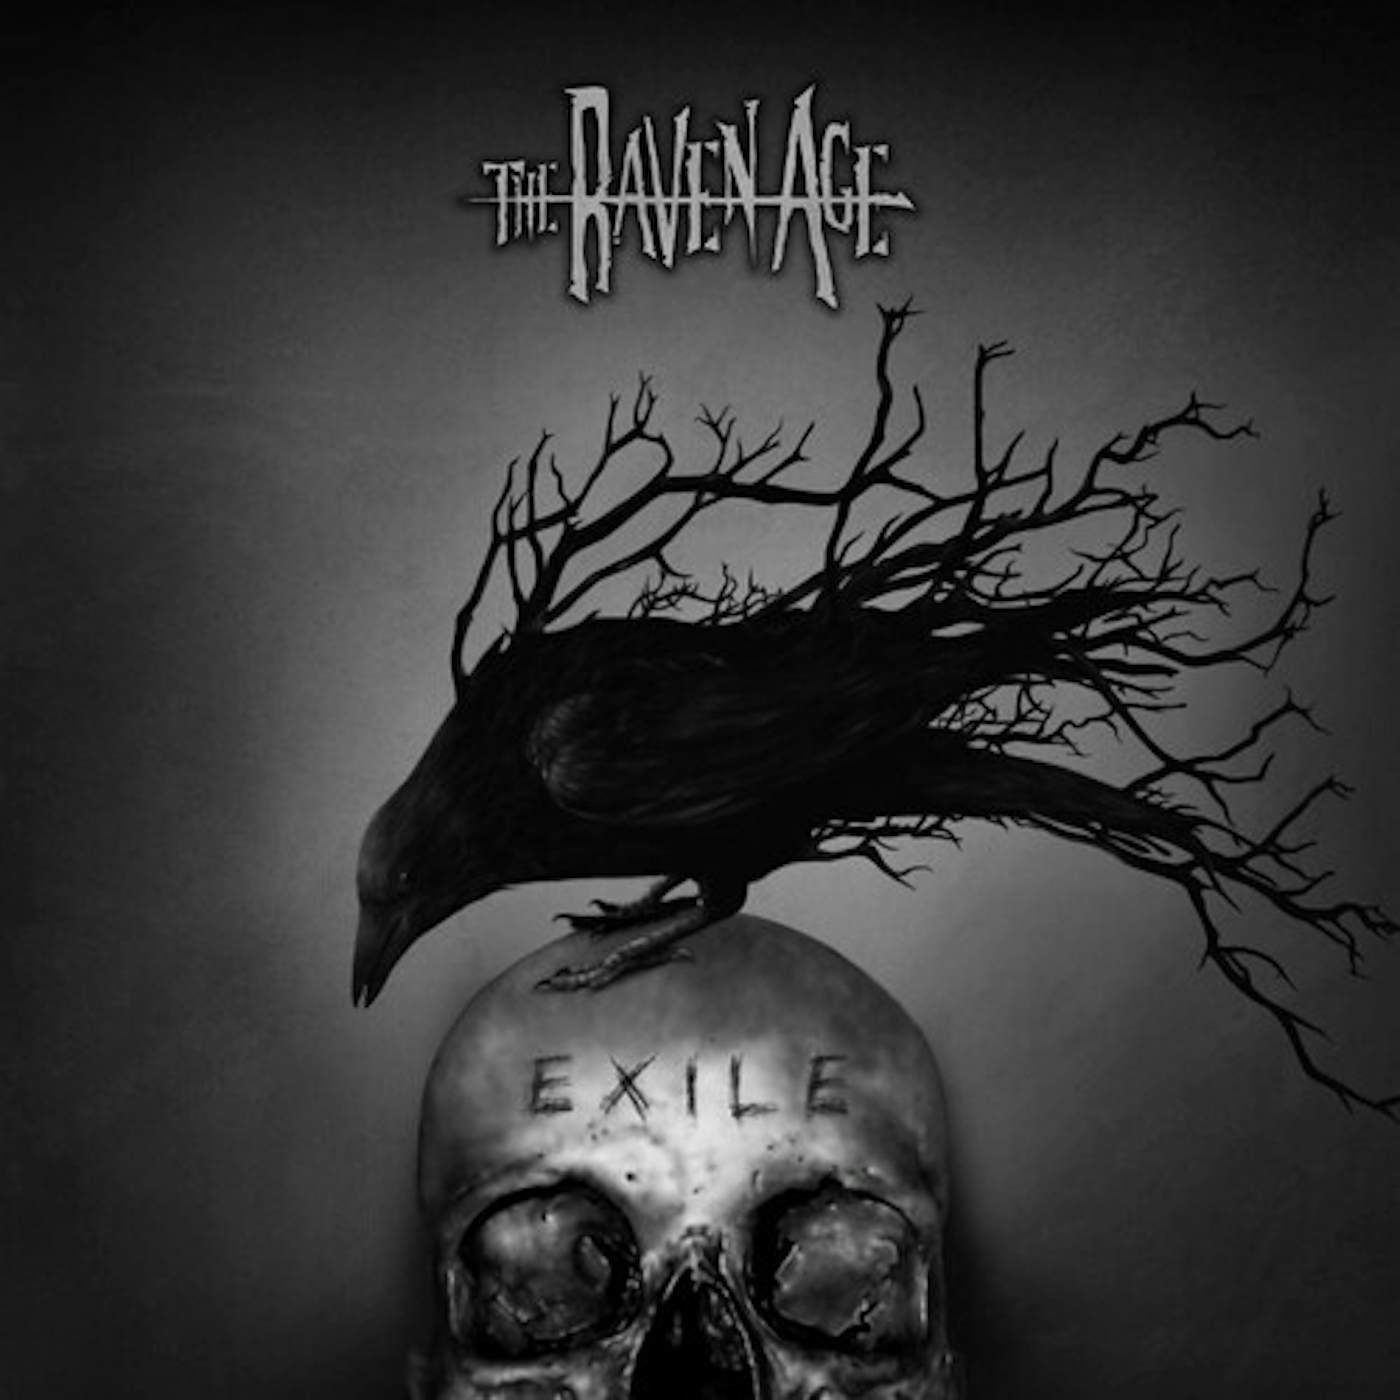 The Raven Age EXILE CD